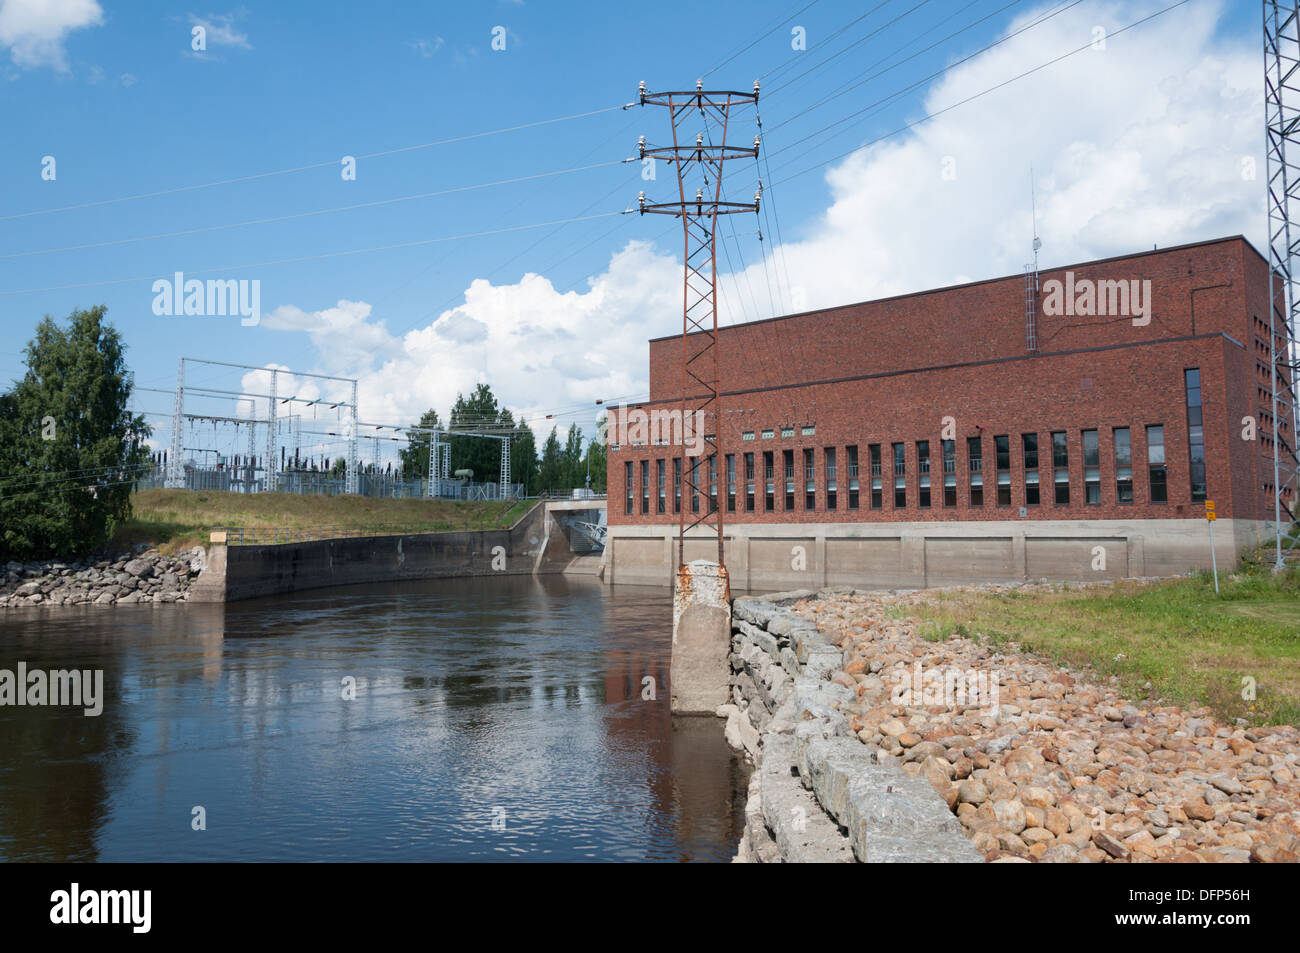 Hydro electric power station in Vammala Finland built in 1950 Stock Photo